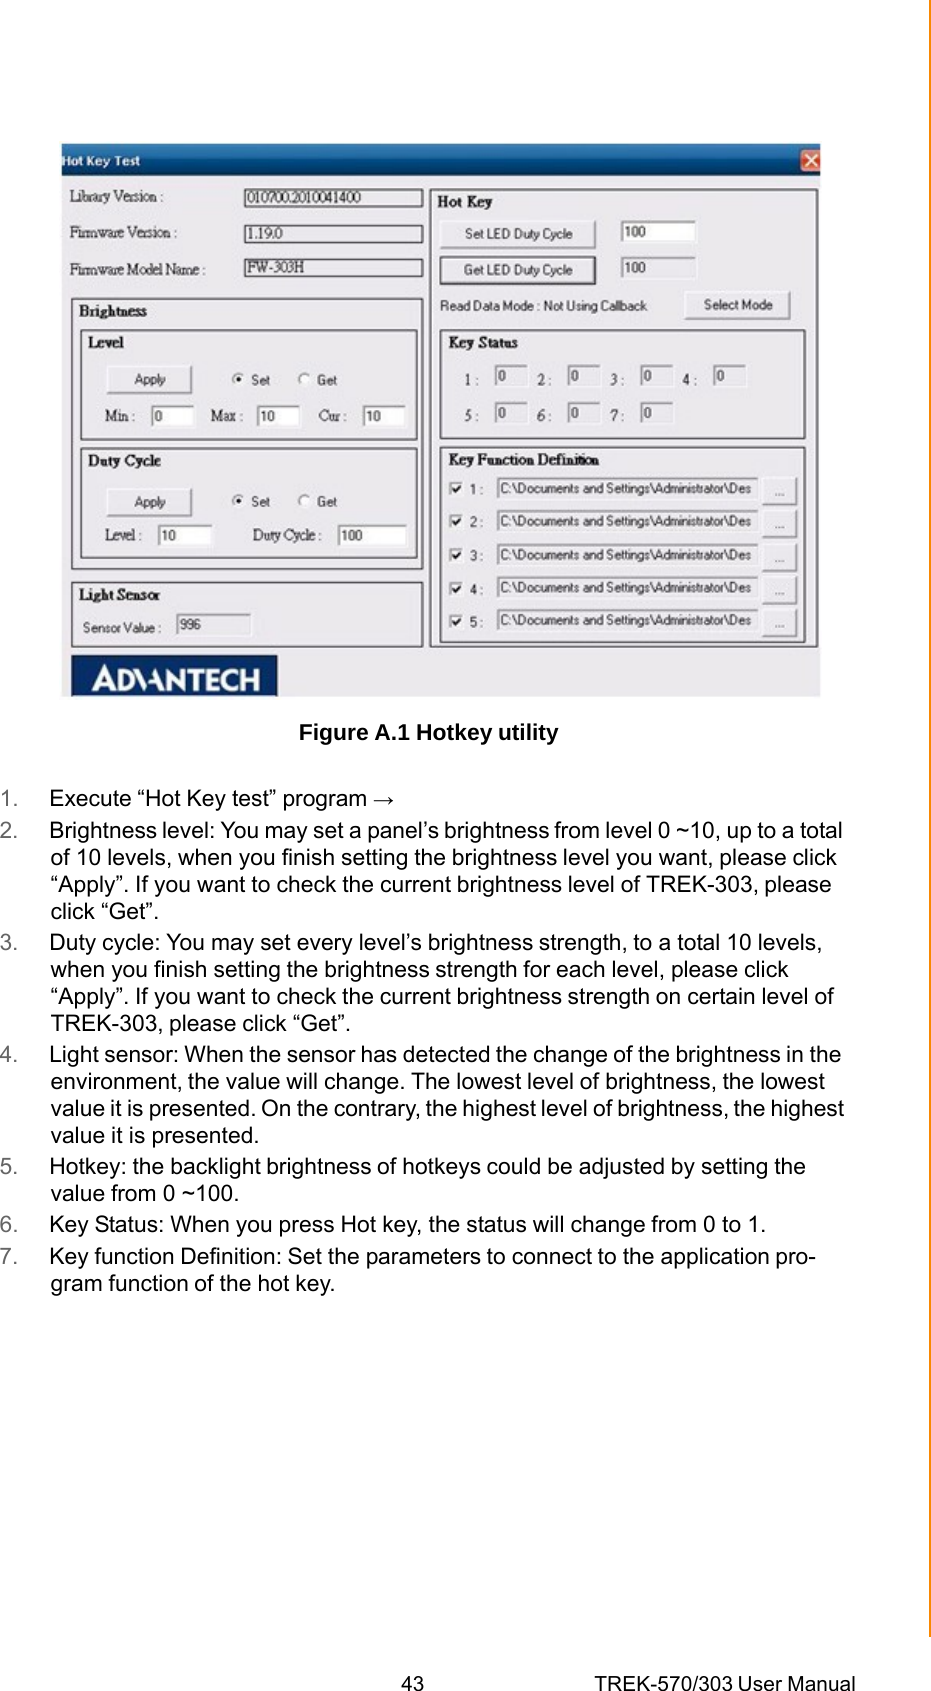 43 TREK-570/303 User ManualAppendix A TREK-303 Figure A.1 Hotkey utility 1.  Execute “Hot Key test” program → 2.  Brightness level: You may set a panel’s brightness from level 0 ~10, up to a total of 10 levels, when you finish setting the brightness level you want, please click “Apply”. If you want to check the current brightness level of TREK-303, please click “Get”. 3.  Duty cycle: You may set every level’s brightness strength, to a total 10 levels, when you finish setting the brightness strength for each level, please click “Apply”. If you want to check the current brightness strength on certain level of TREK-303, please click “Get”. 4.  Light sensor: When the sensor has detected the change of the brightness in the environment, the value will change. The lowest level of brightness, the lowest value it is presented. On the contrary, the highest level of brightness, the highest value it is presented. 5.  Hotkey: the backlight brightness of hotkeys could be adjusted by setting the value from 0 ~100. 6.  Key Status: When you press Hot key, the status will change from 0 to 1. 7.  Key function Definition: Set the parameters to connect to the application pro- gram function of the hot key. 